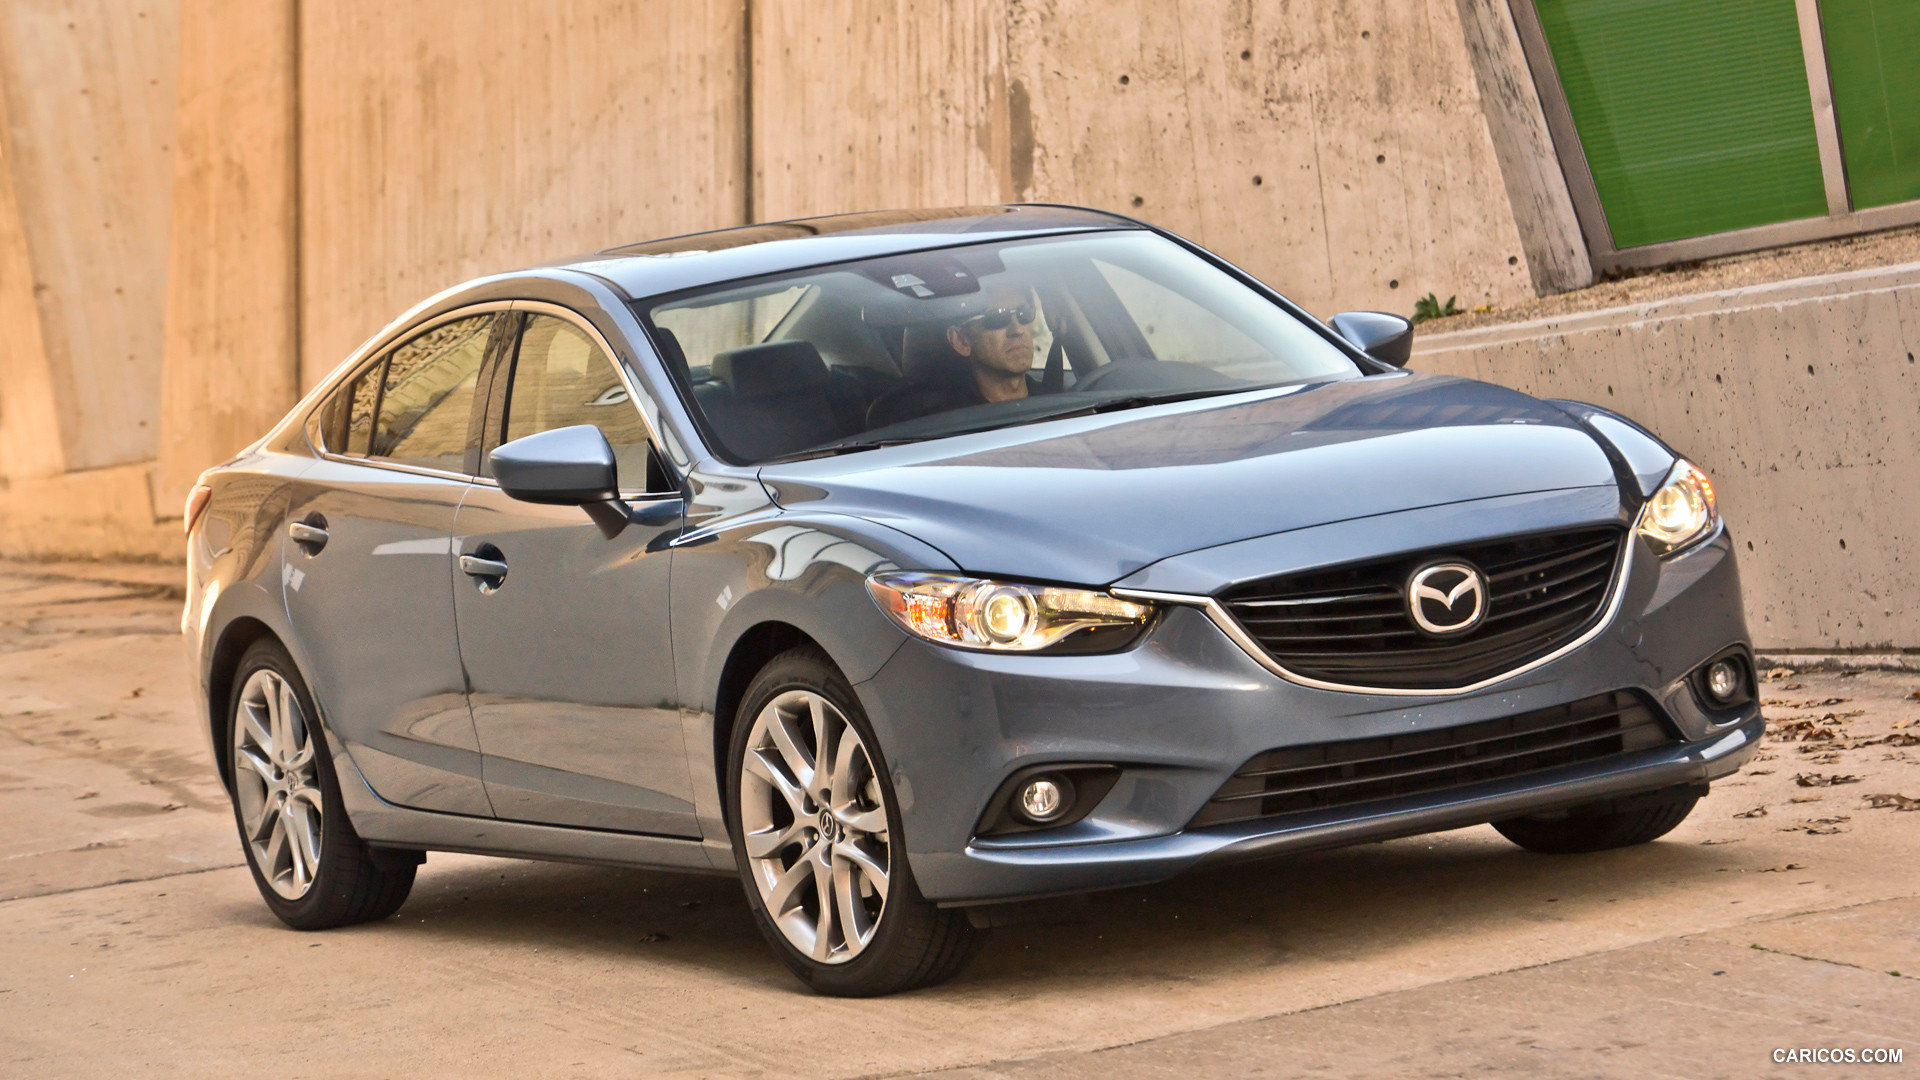 2014 Mazda6 GT - Front, #115 of 179